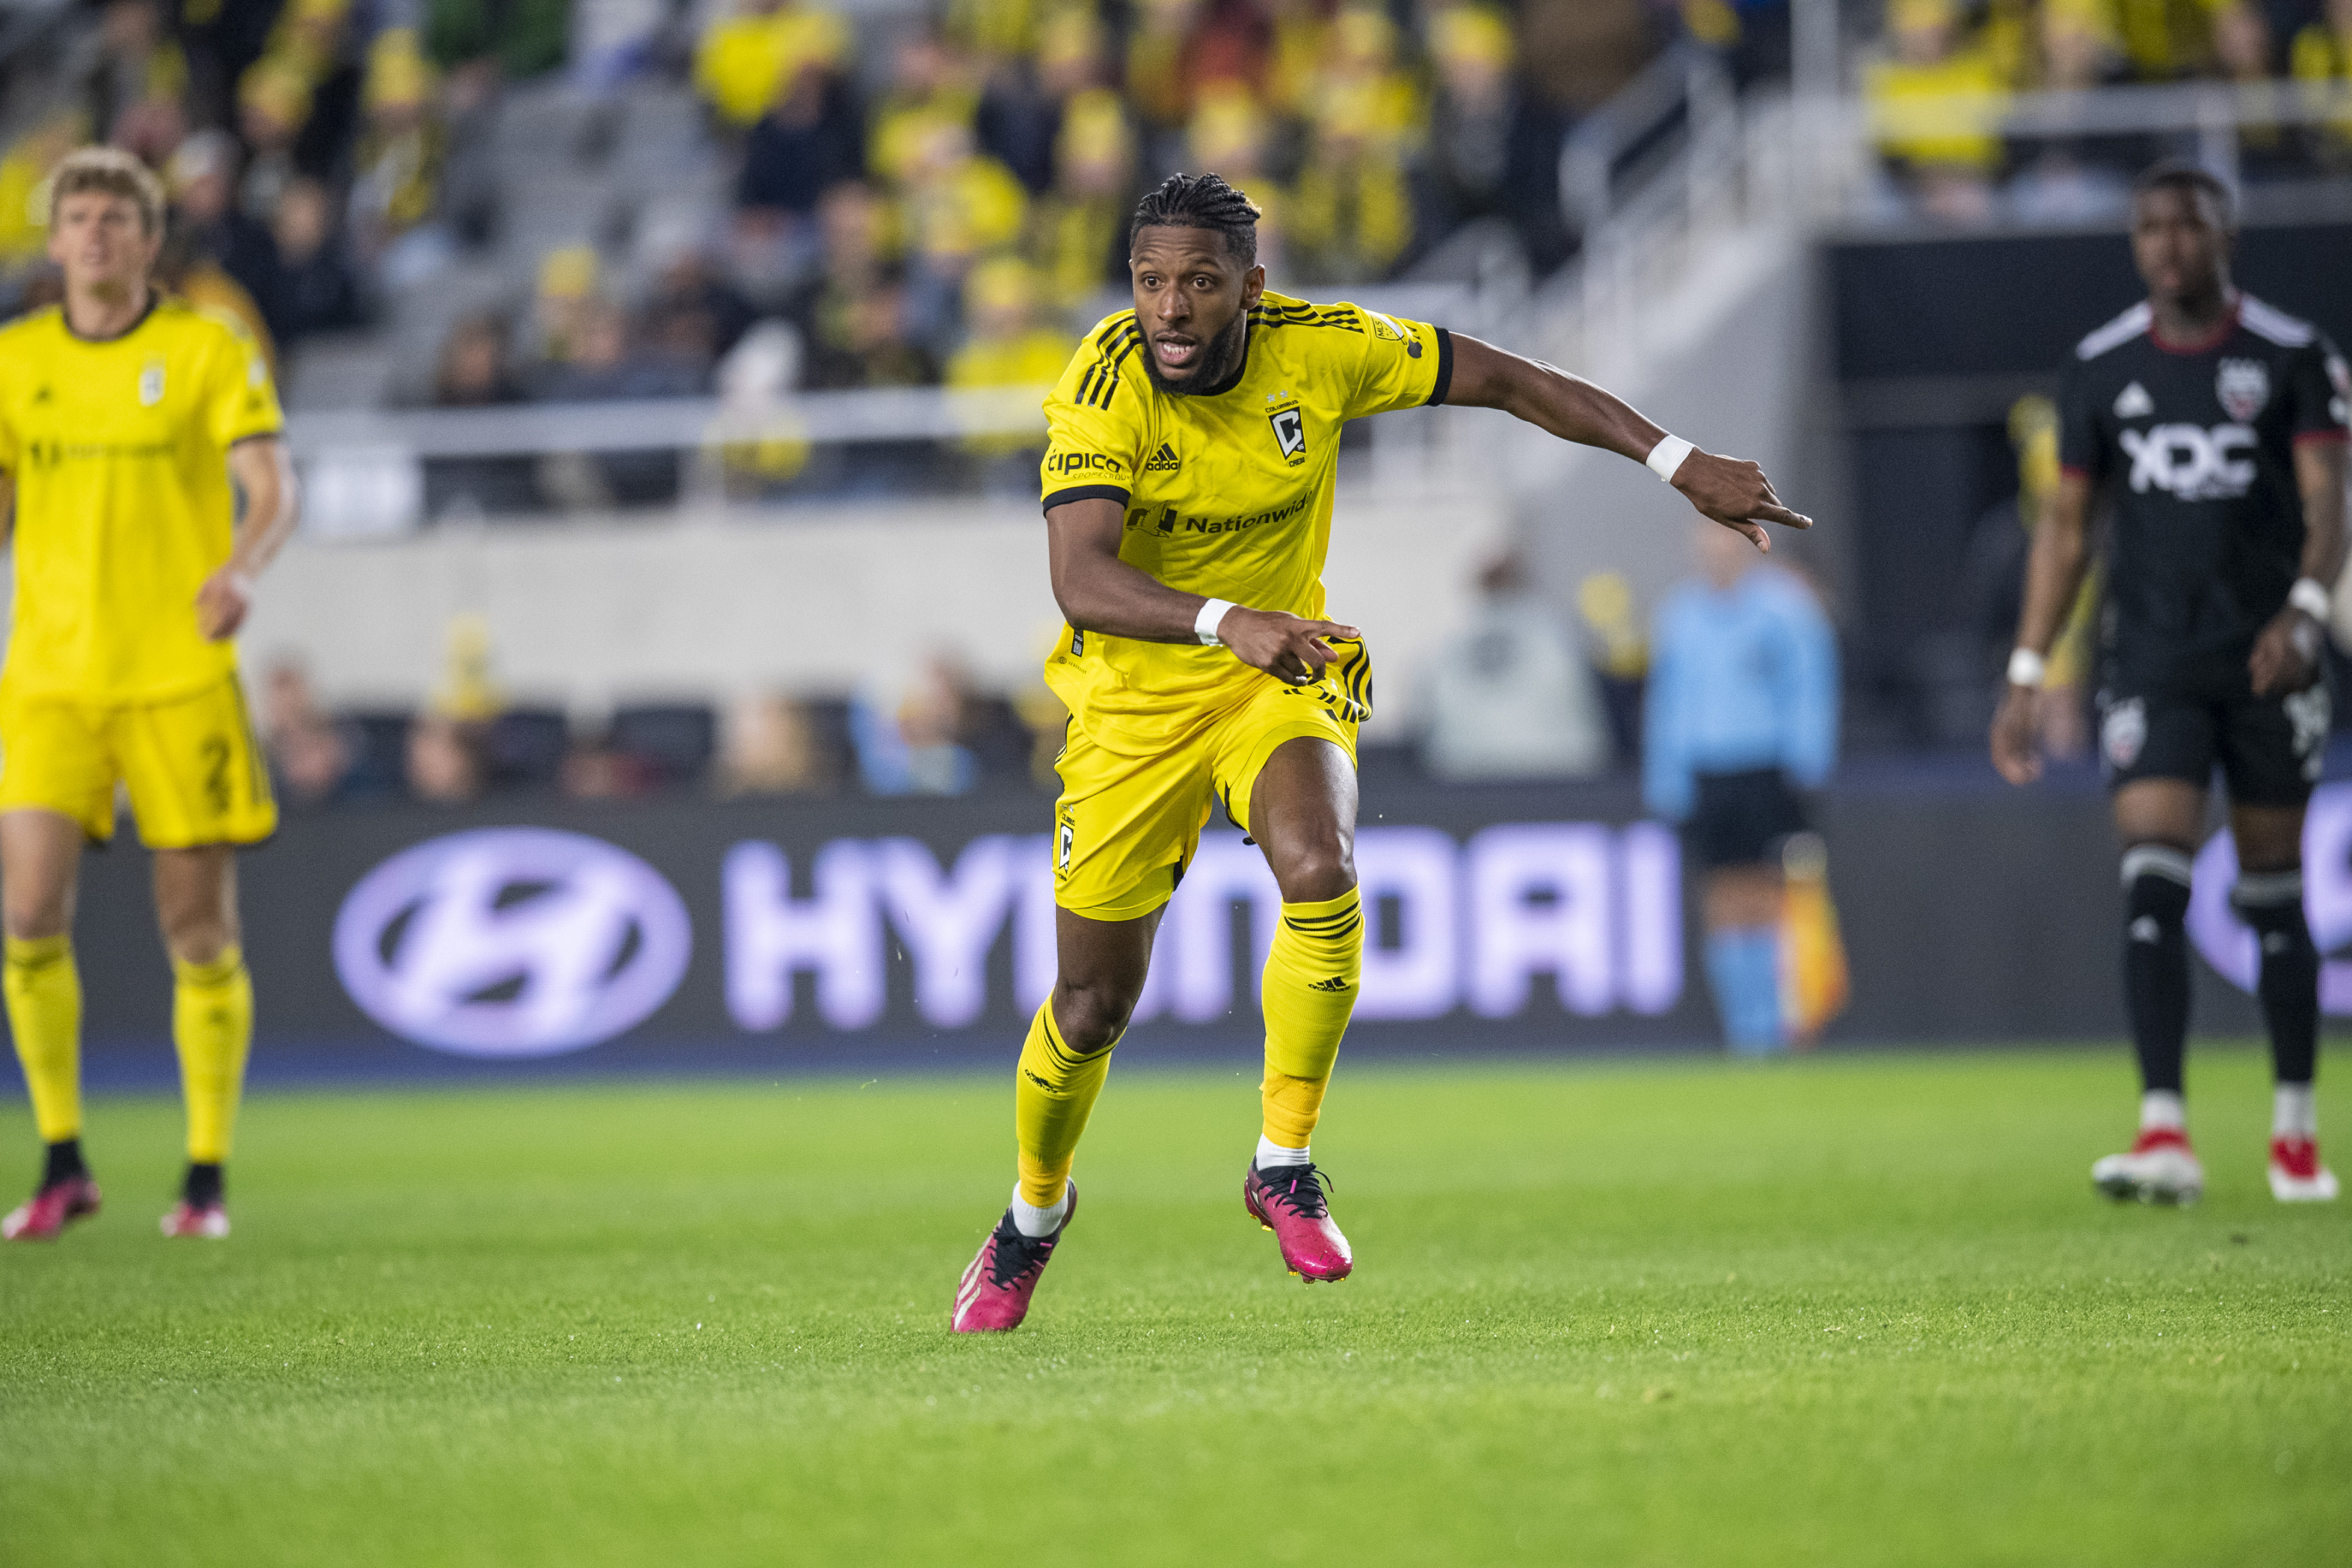 Steven Moreira of the Columbus Crew running across the pitch